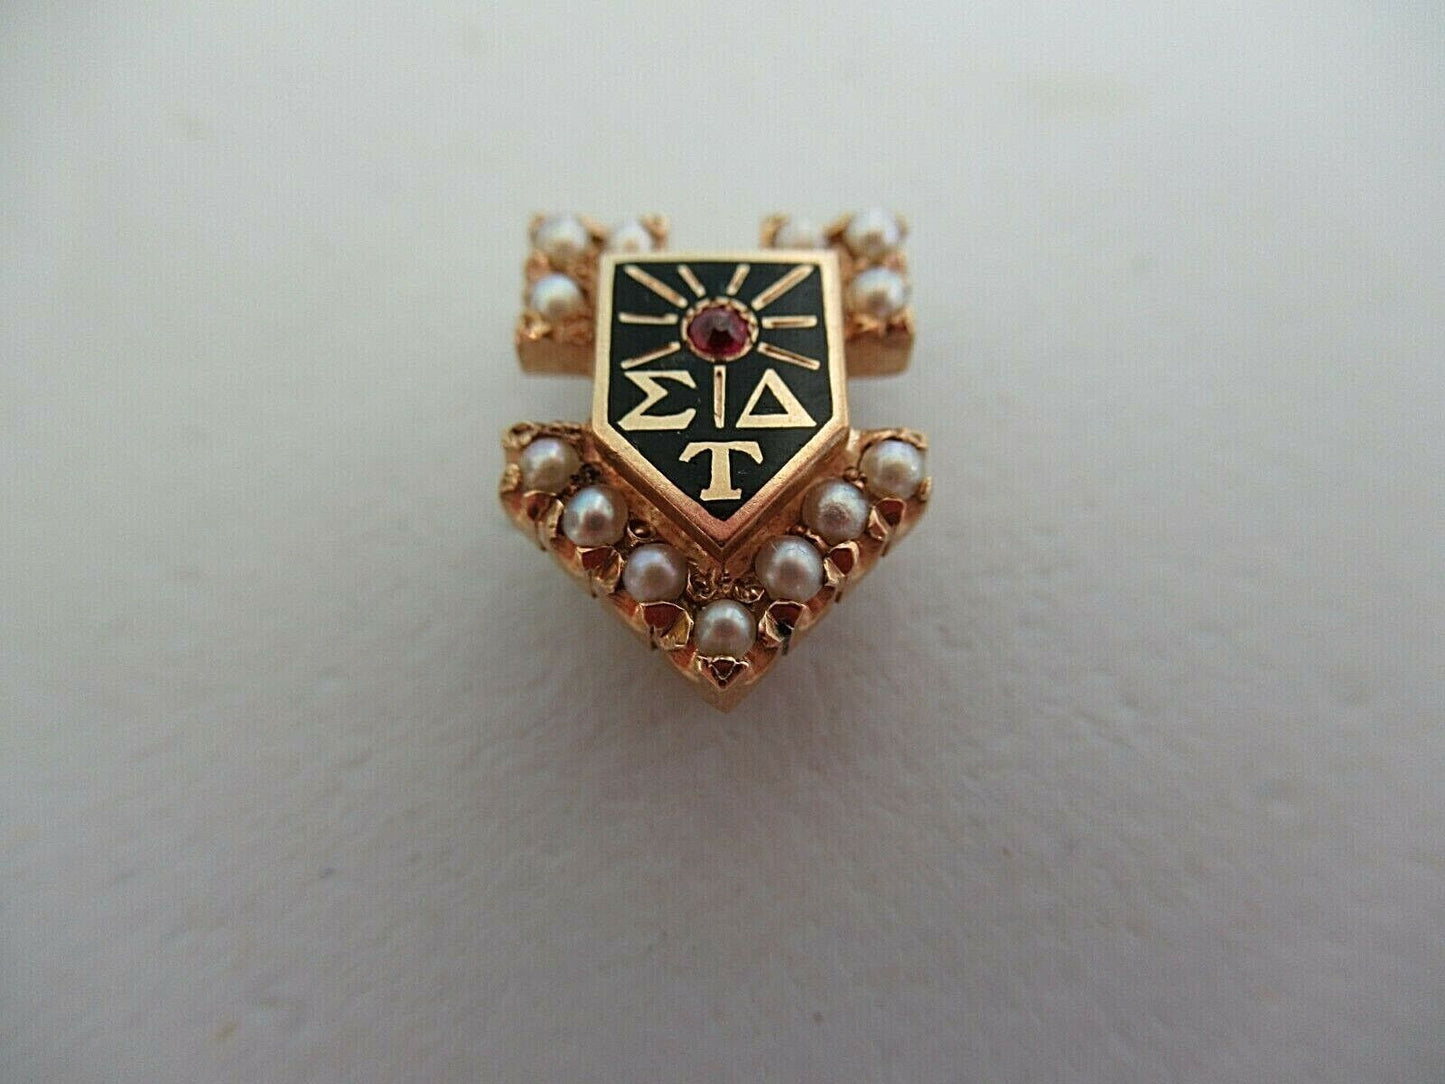 USA FRATERNITY PIN SIGMA DELTA TAU. MADE IN GOLD 14K. MARKED.1396